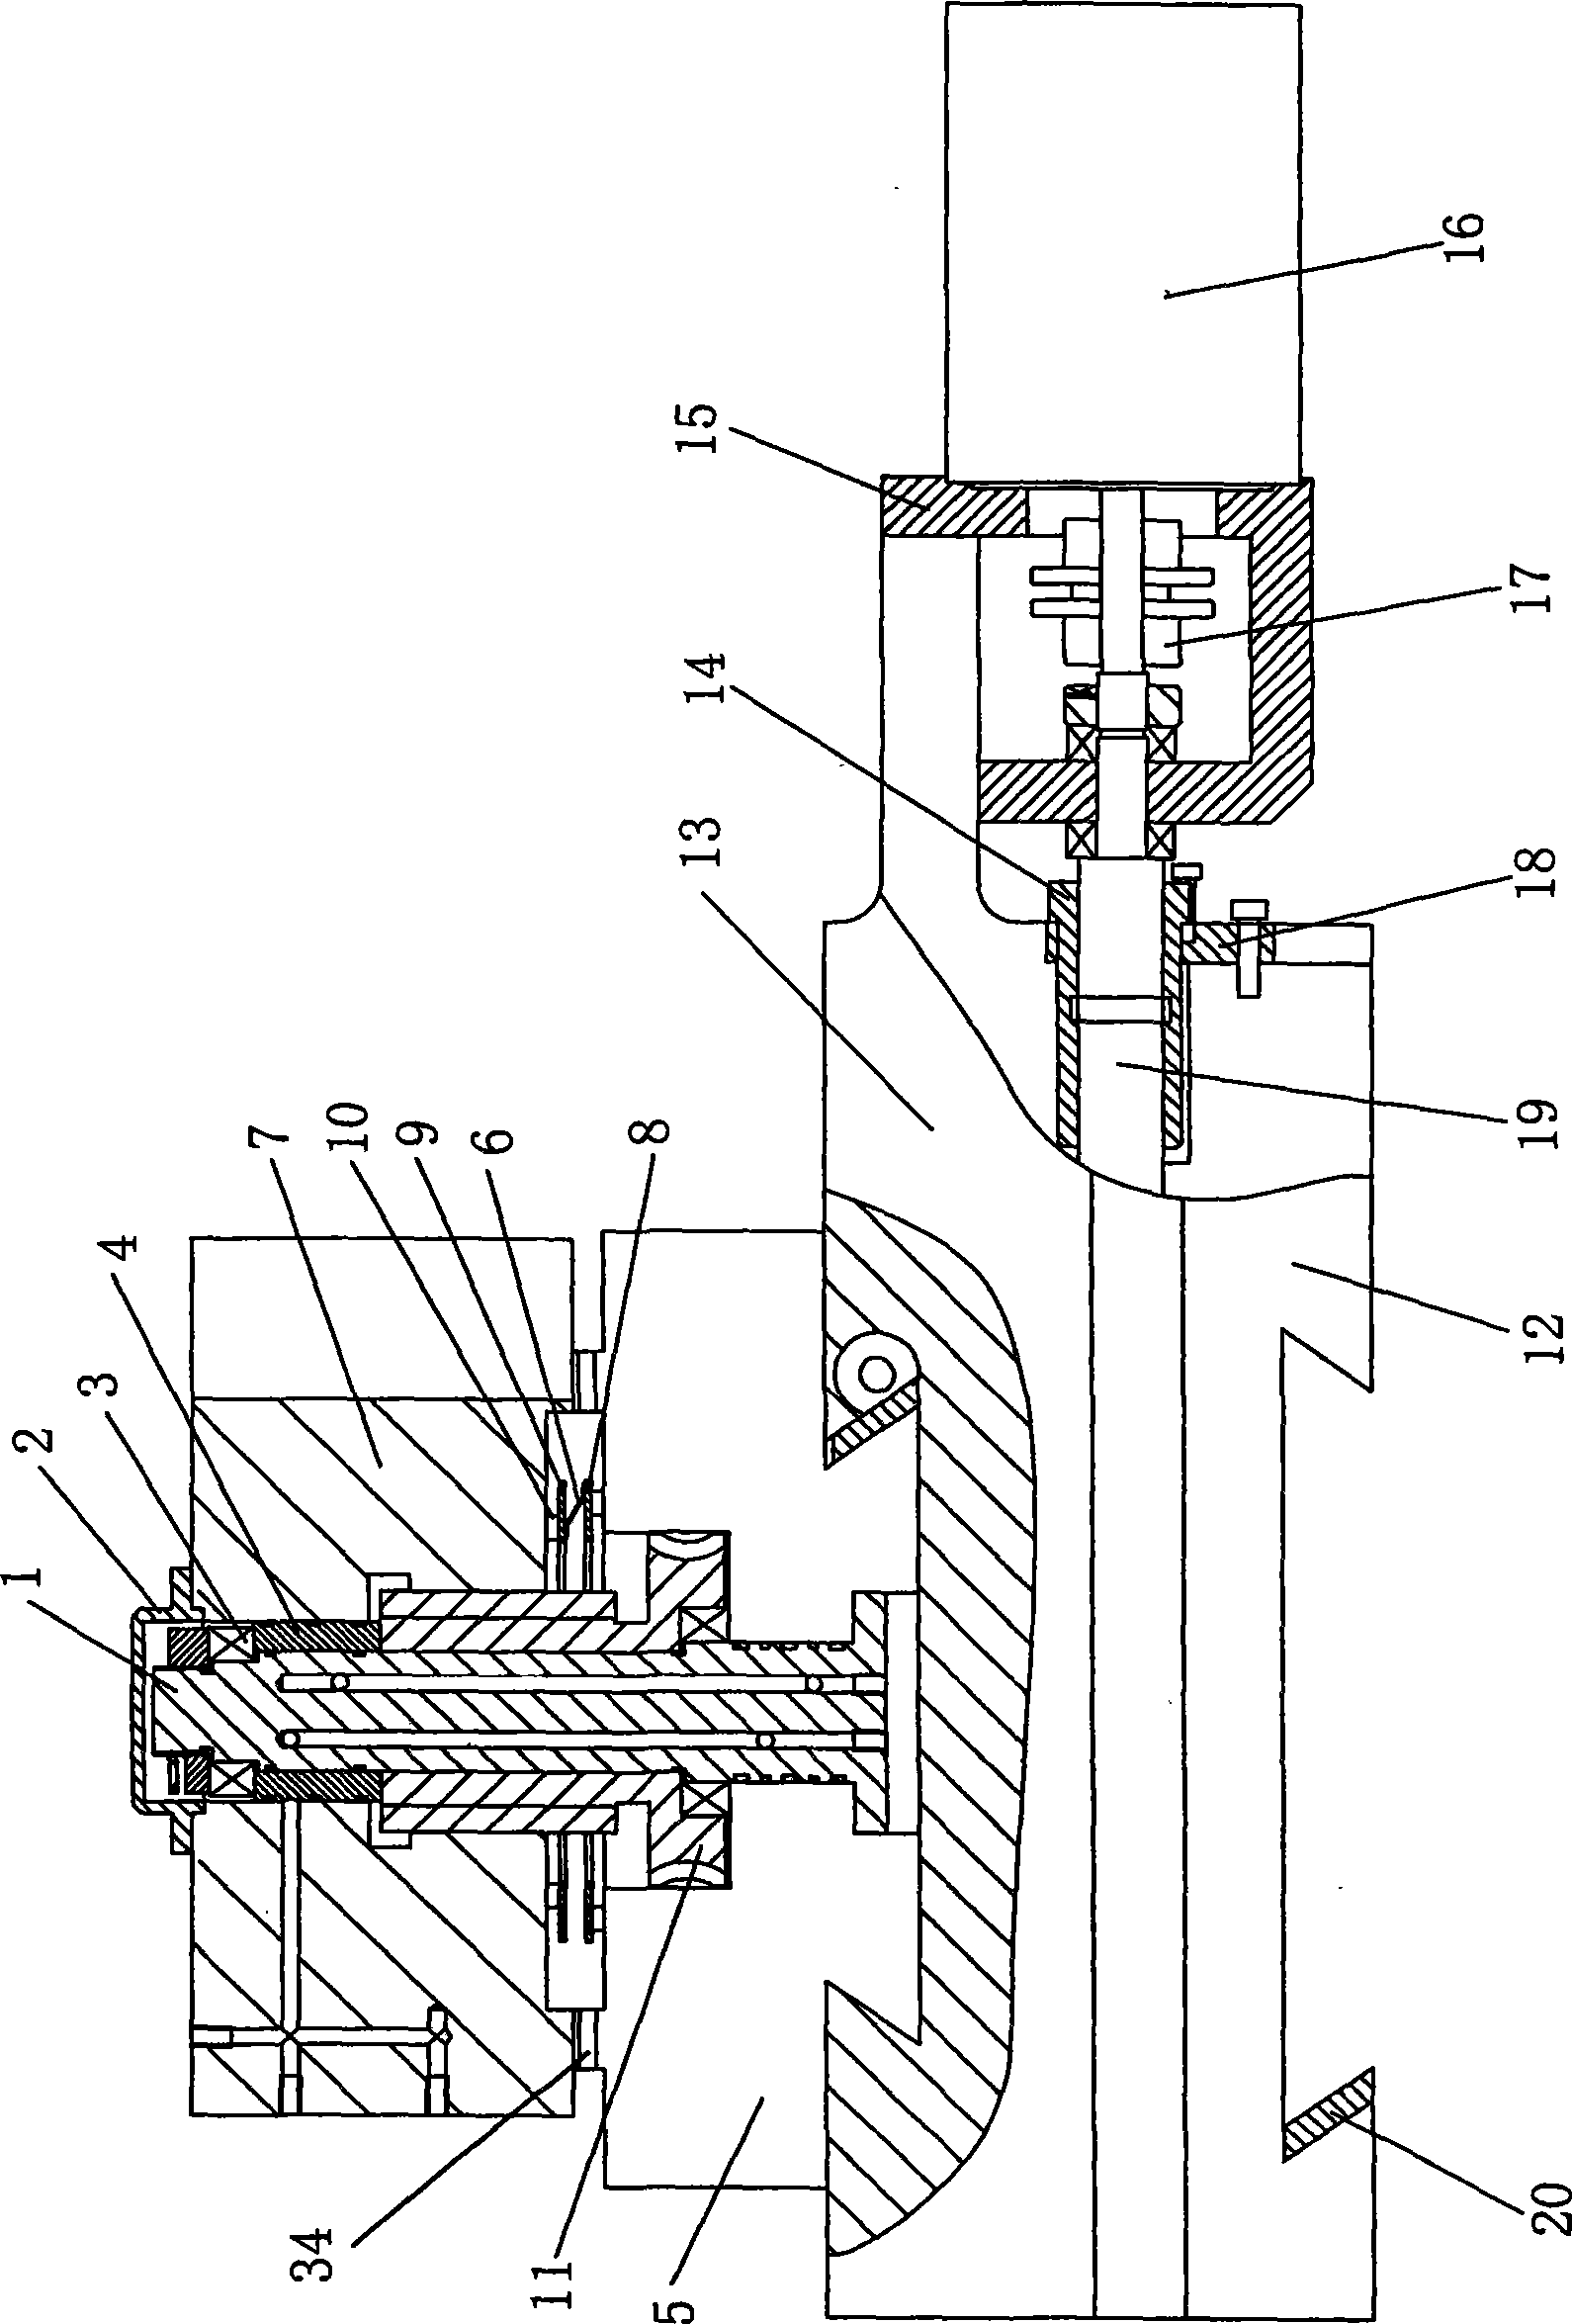 Numerical control supersonic machining apparatus for general lathe